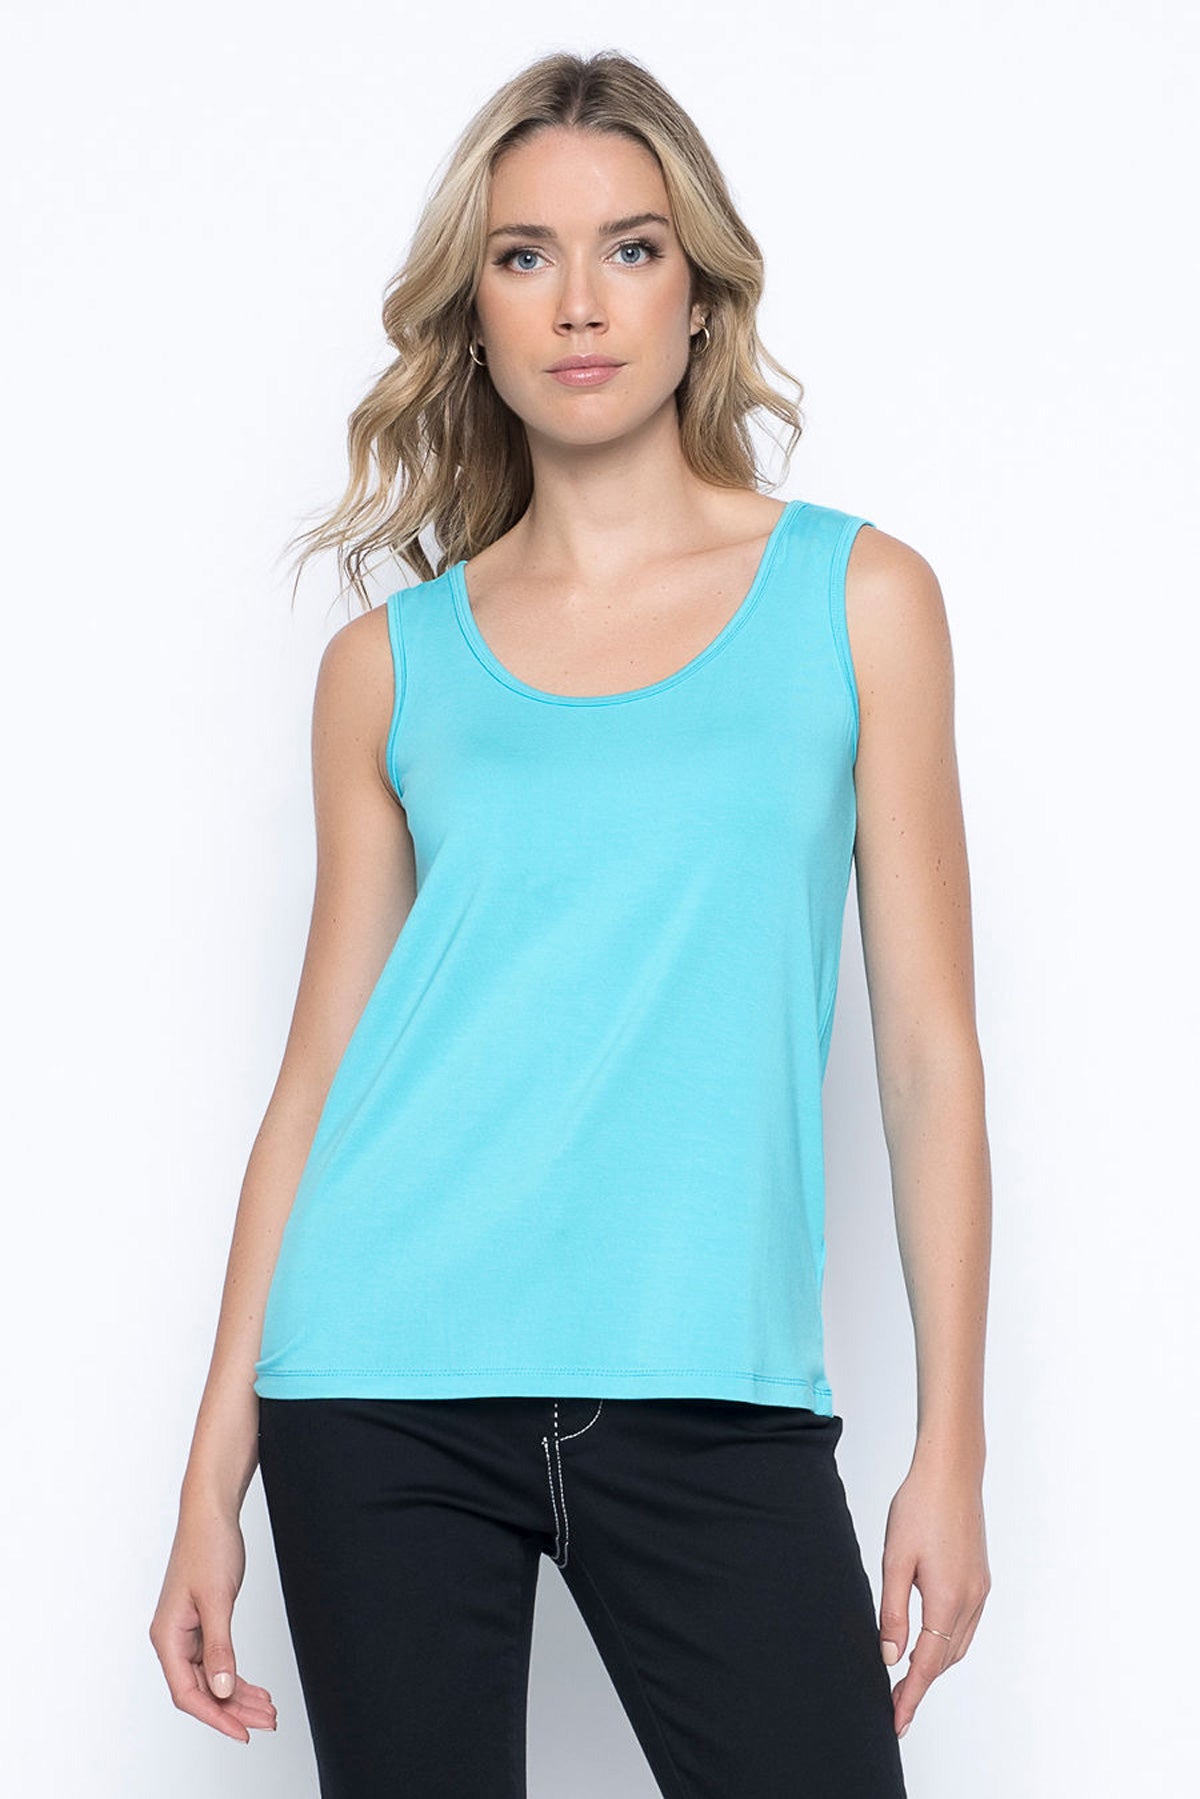 Zelos Womens Tank Top Shirt Blue Sleeveless Scoop Neck Racerback Pullover S  - $7 - From Missy